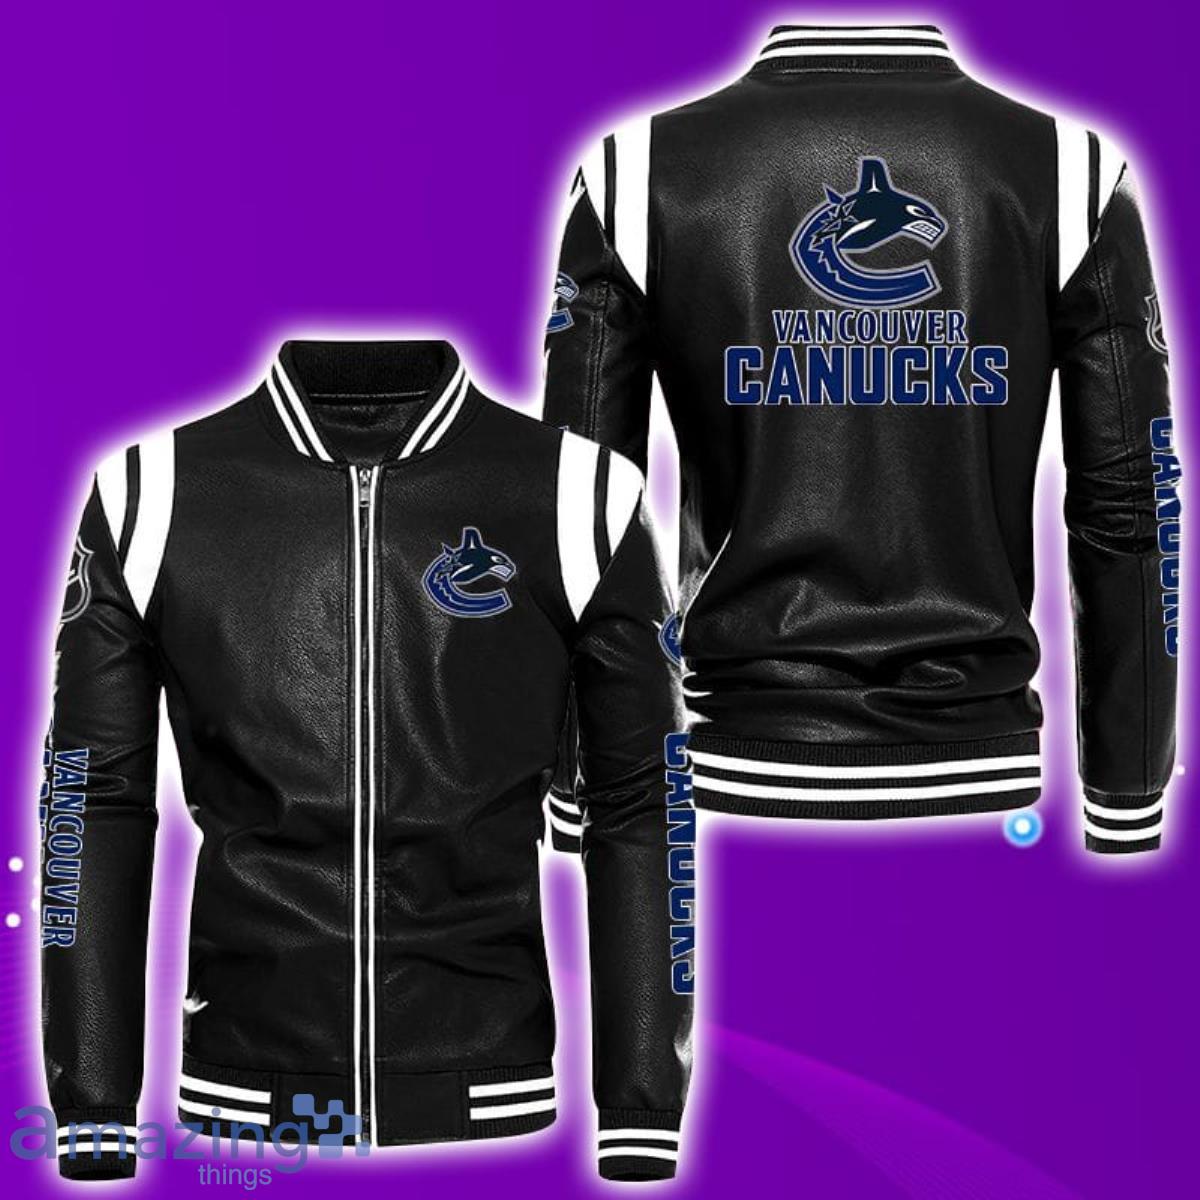 Vancouver Canucks Leather Bomber Jacket Best Gift For Men And Women Fans